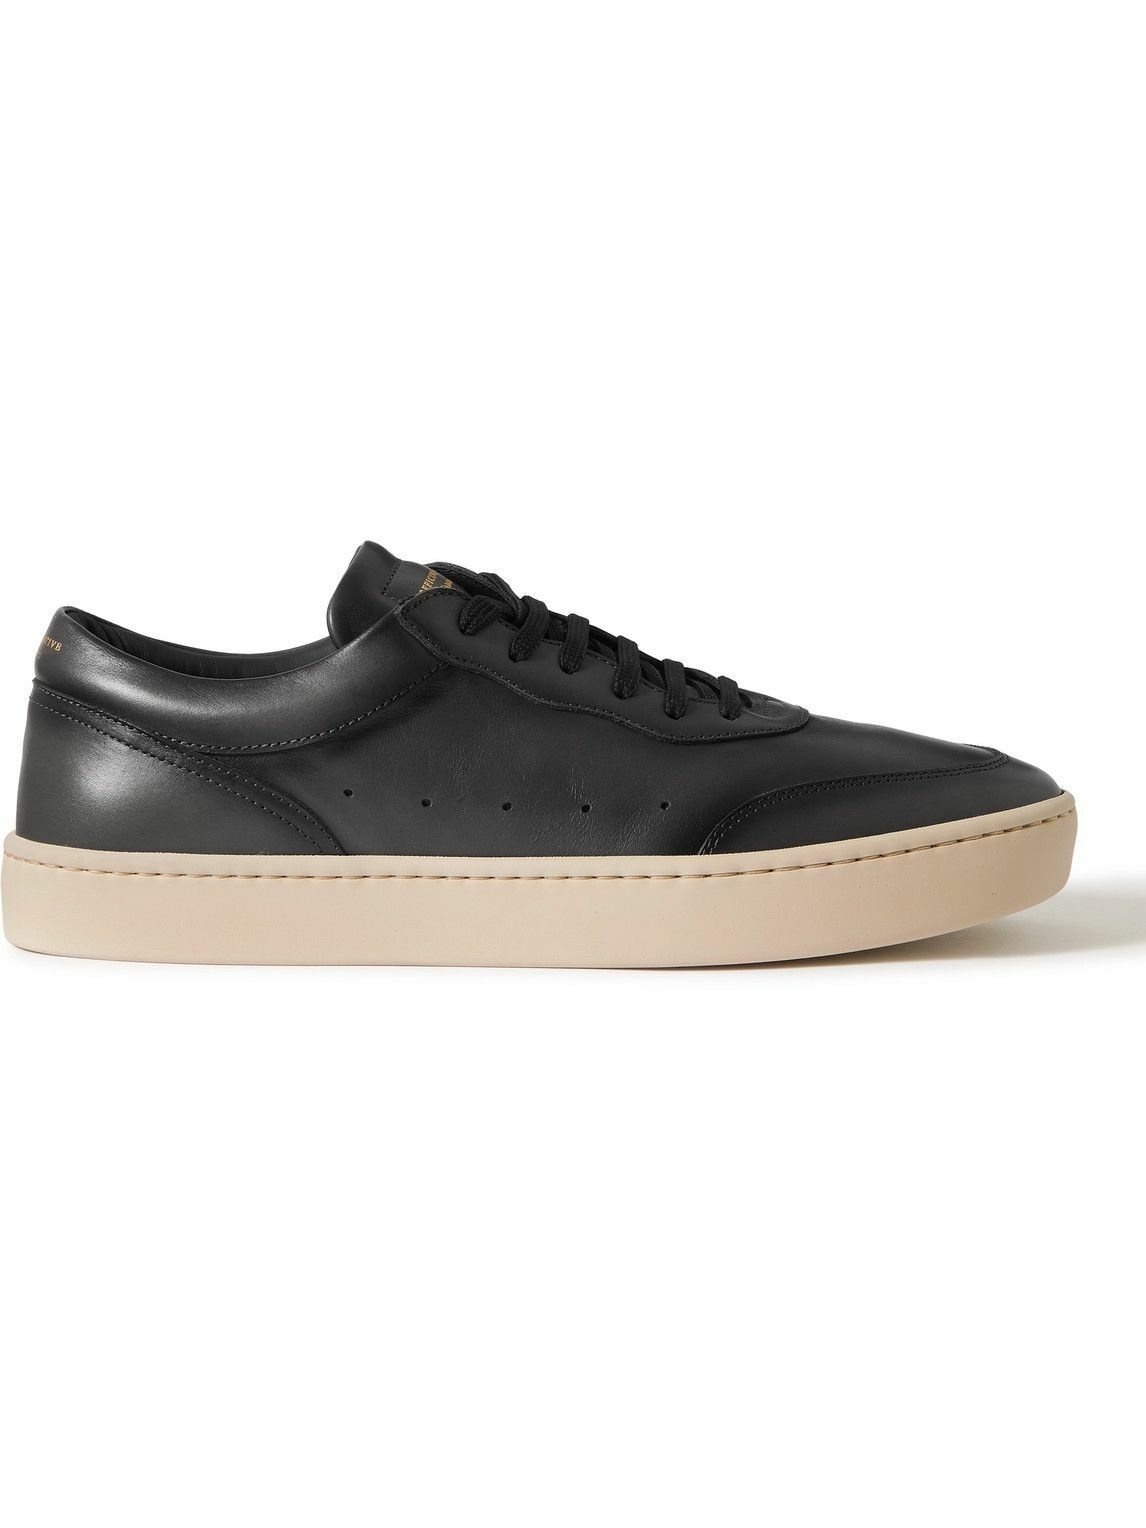 Officine Creative - Kyle Lux 001 Leather Sneakers - Gray Officine Creative